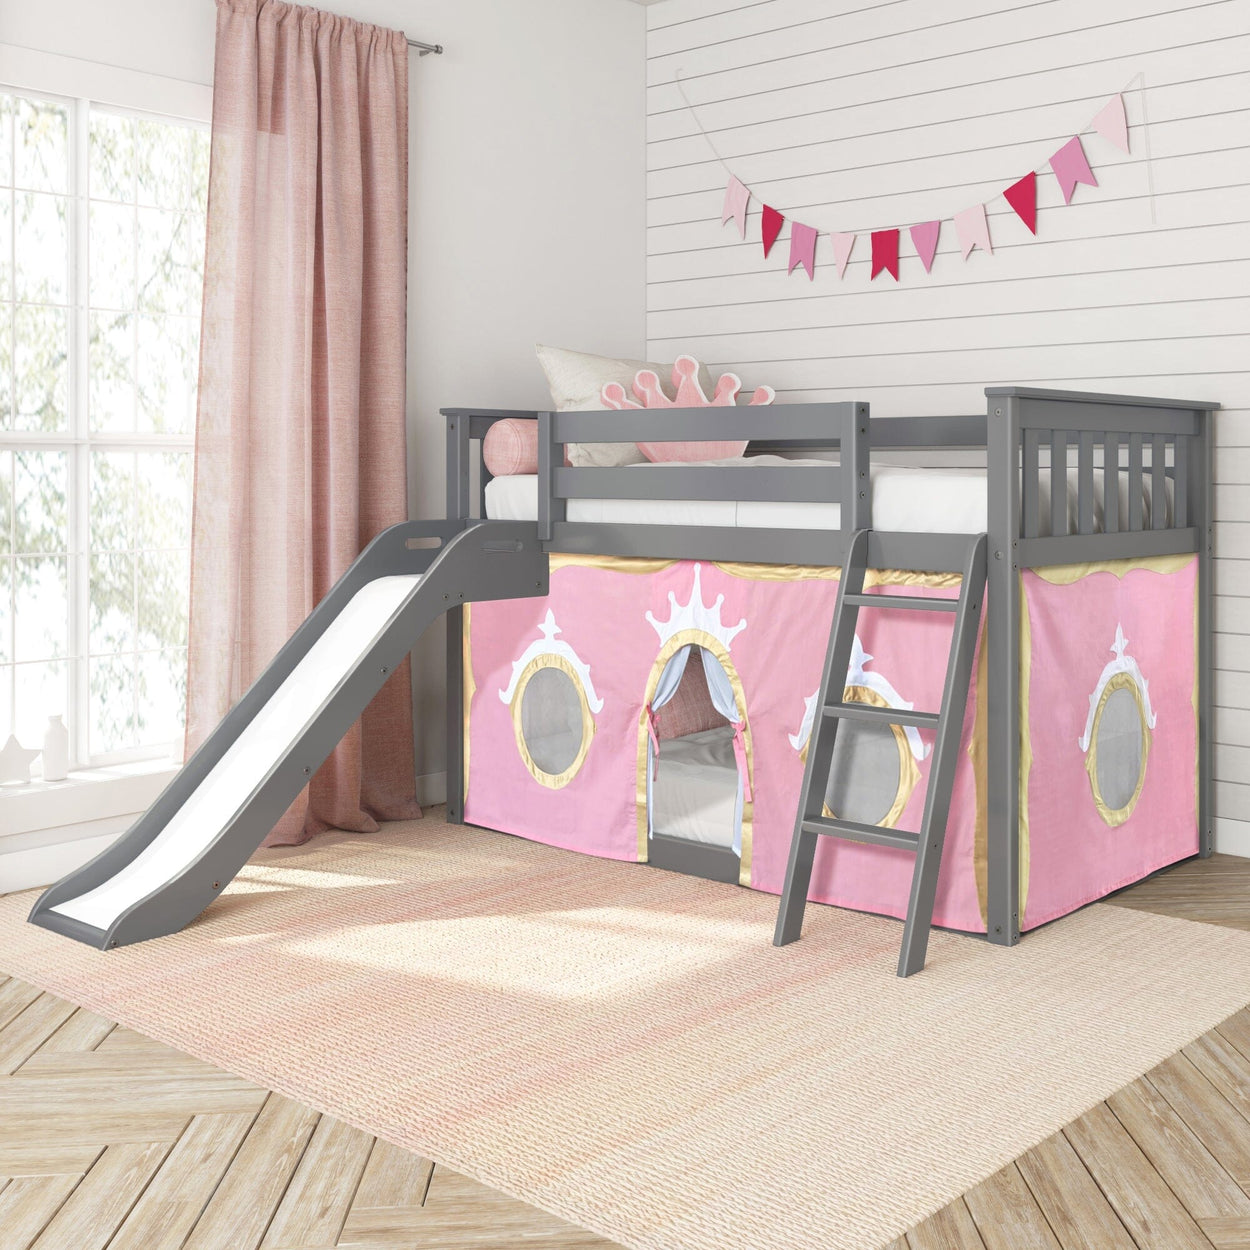 180417121083 : Bunk Beds Low Bunk with Easy Slide and Light Pink and Gold Princess Curtain, Grey